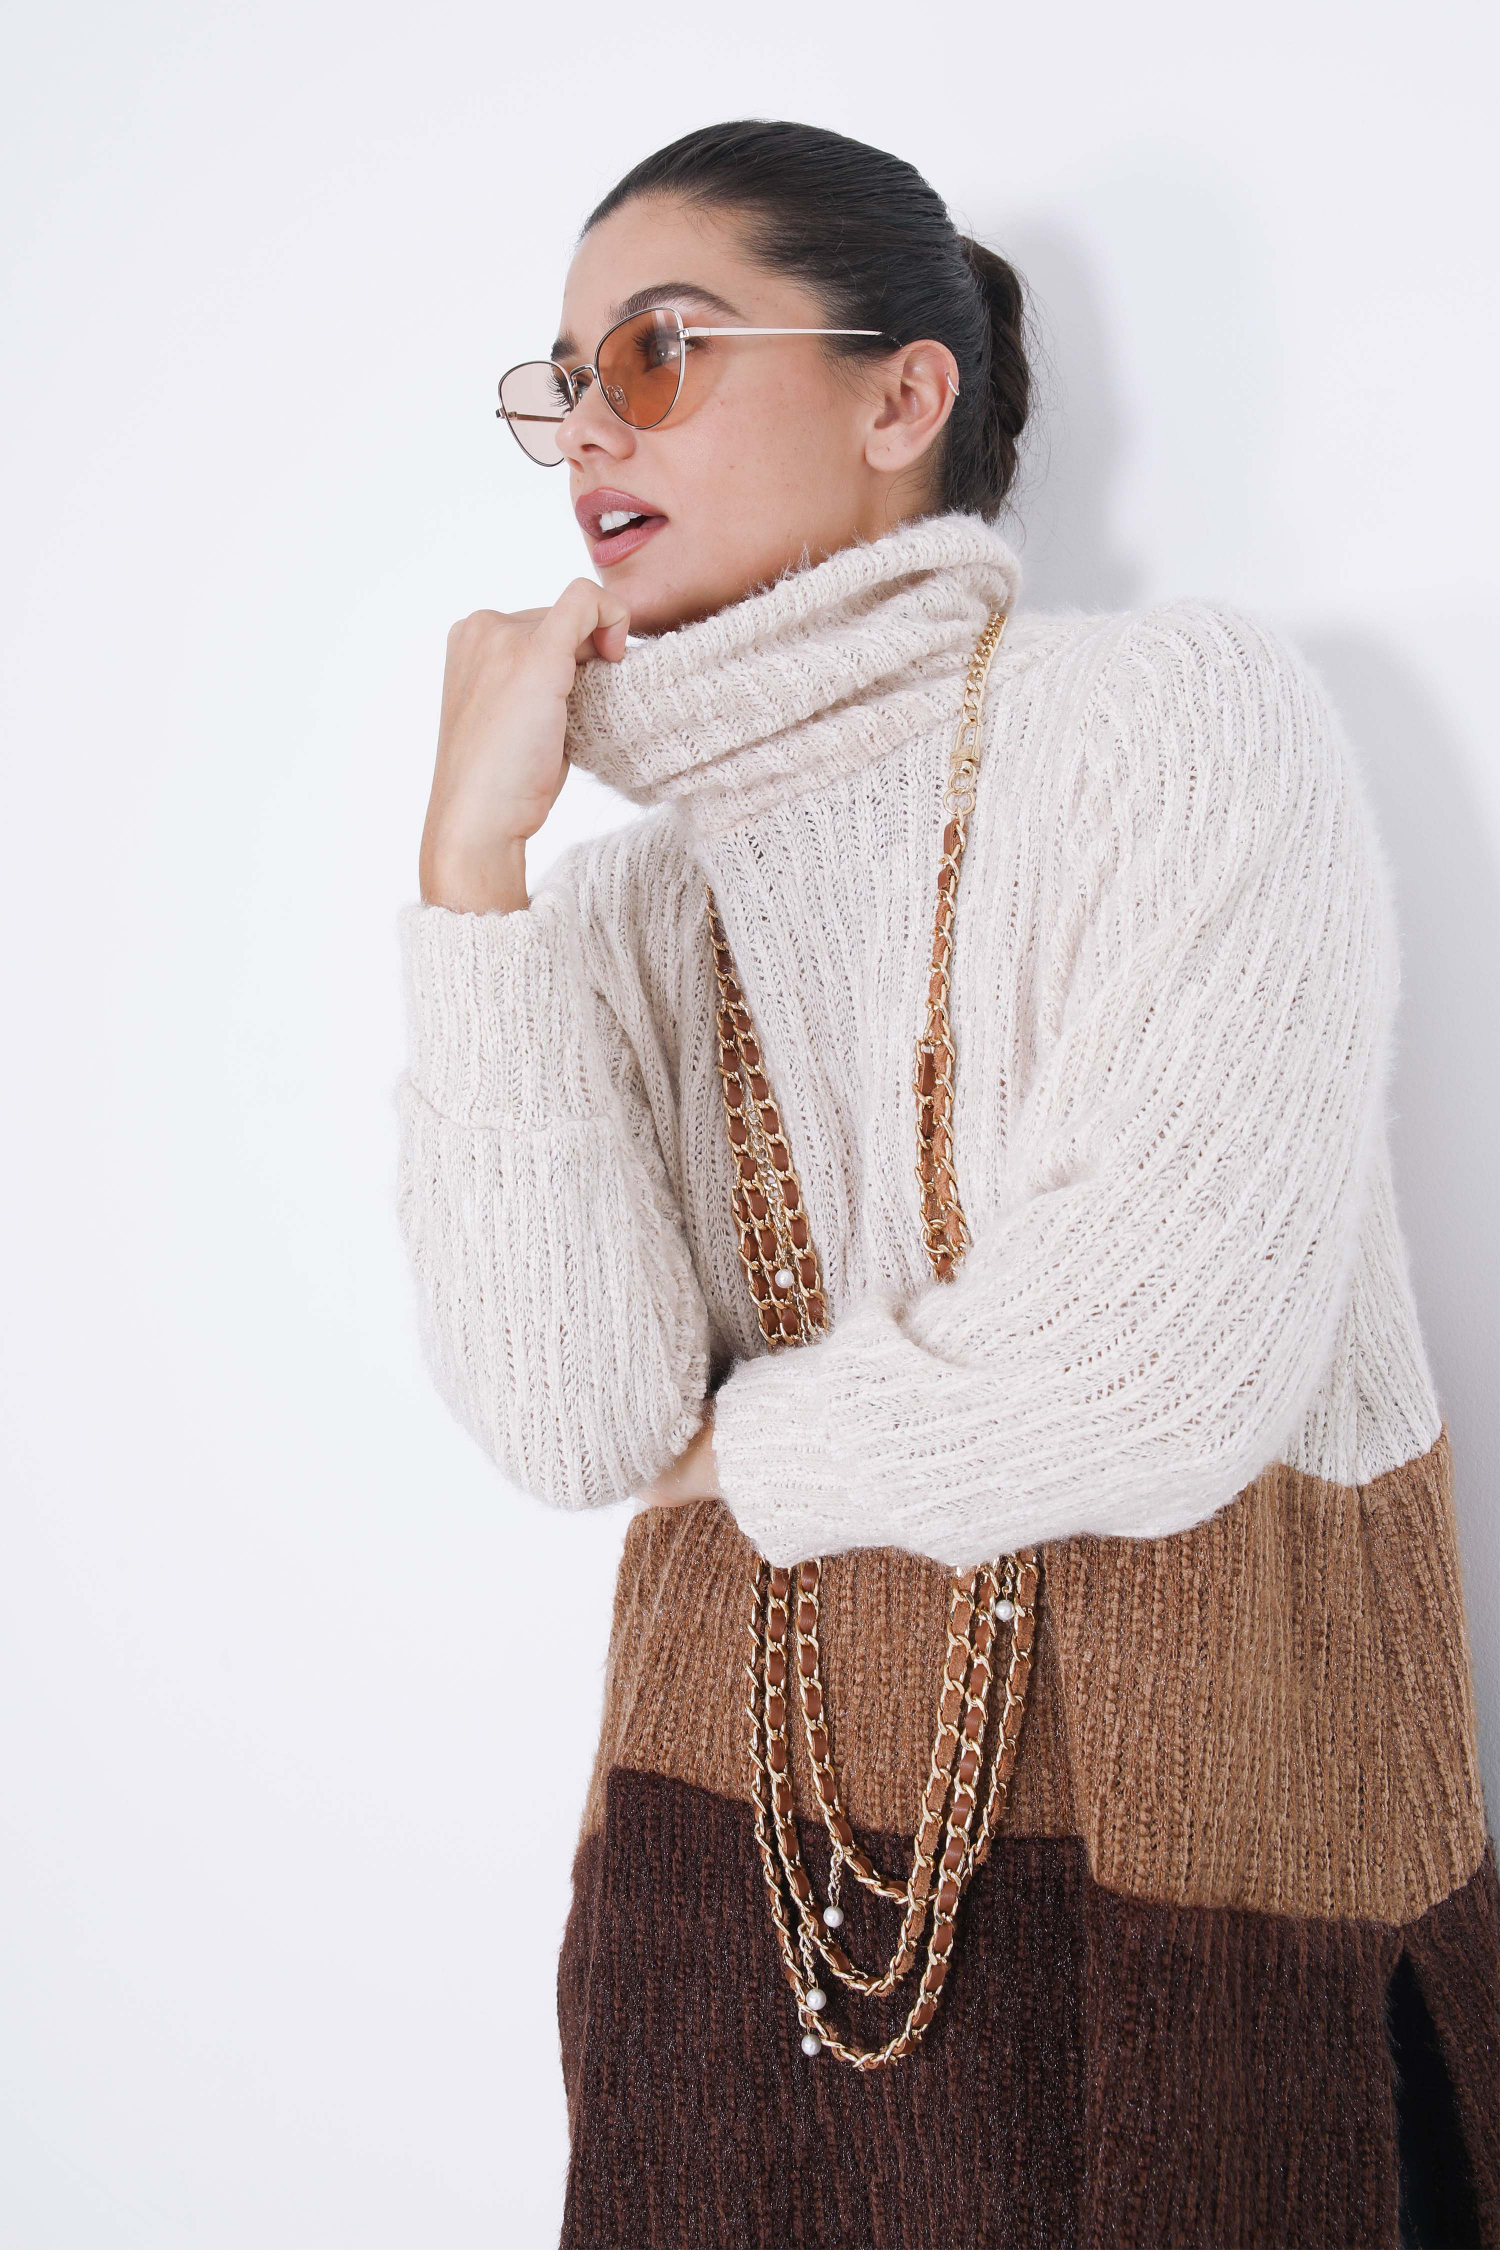 Long tricolor knit sweater